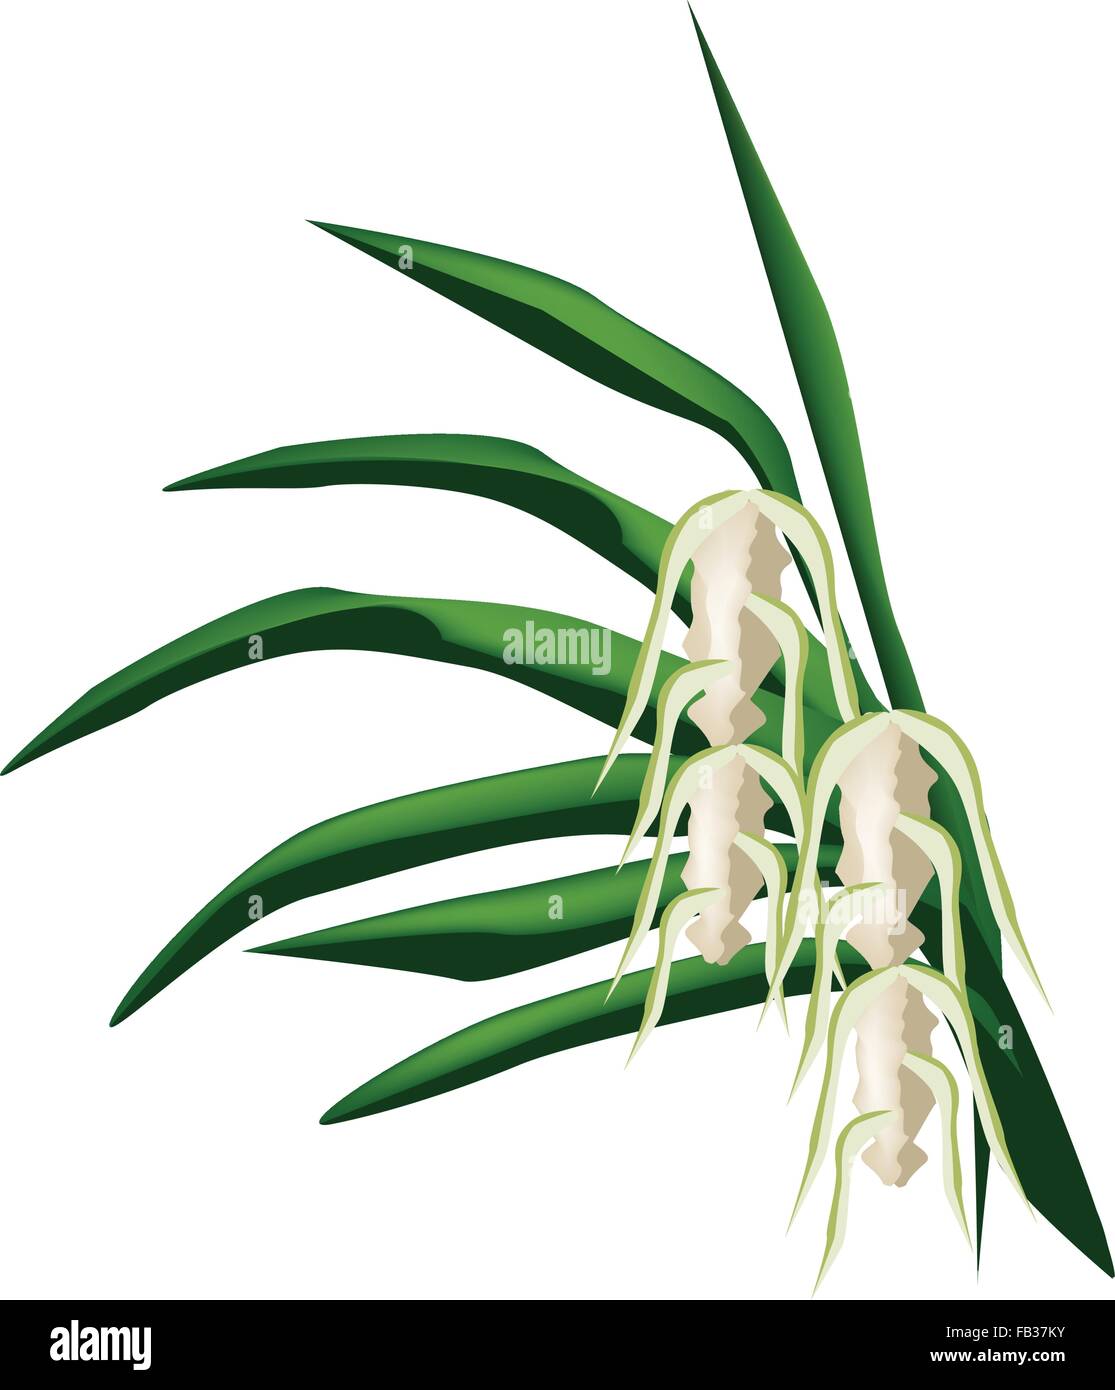 Beautiful Flower, Illustration of Screw Pine Flowers or Pandanus Flowers on Green Leaves Isolated on A White Background Stock Vector